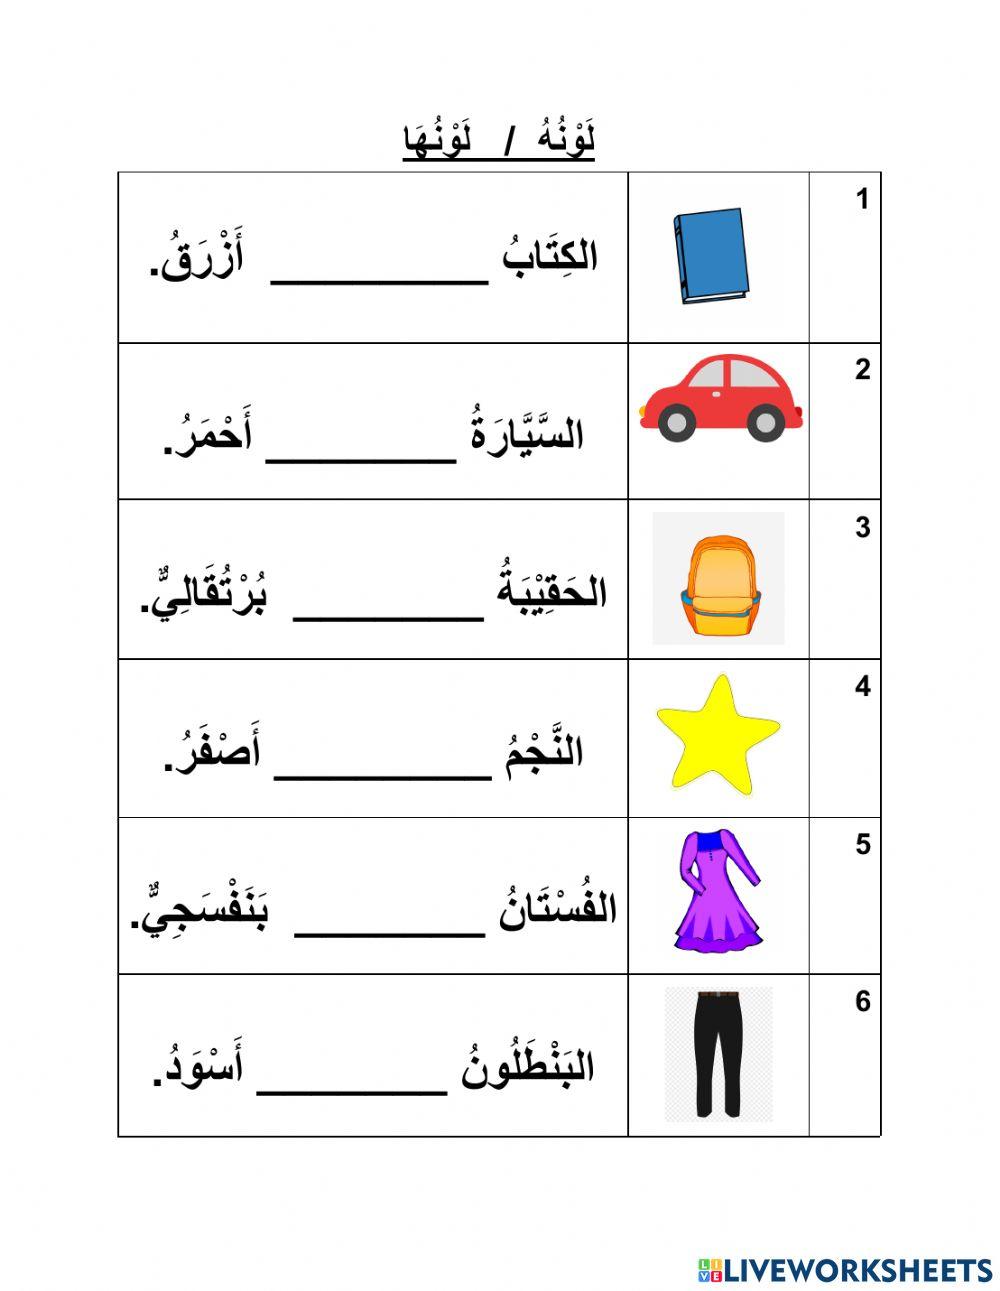 Colors in Arabic Test